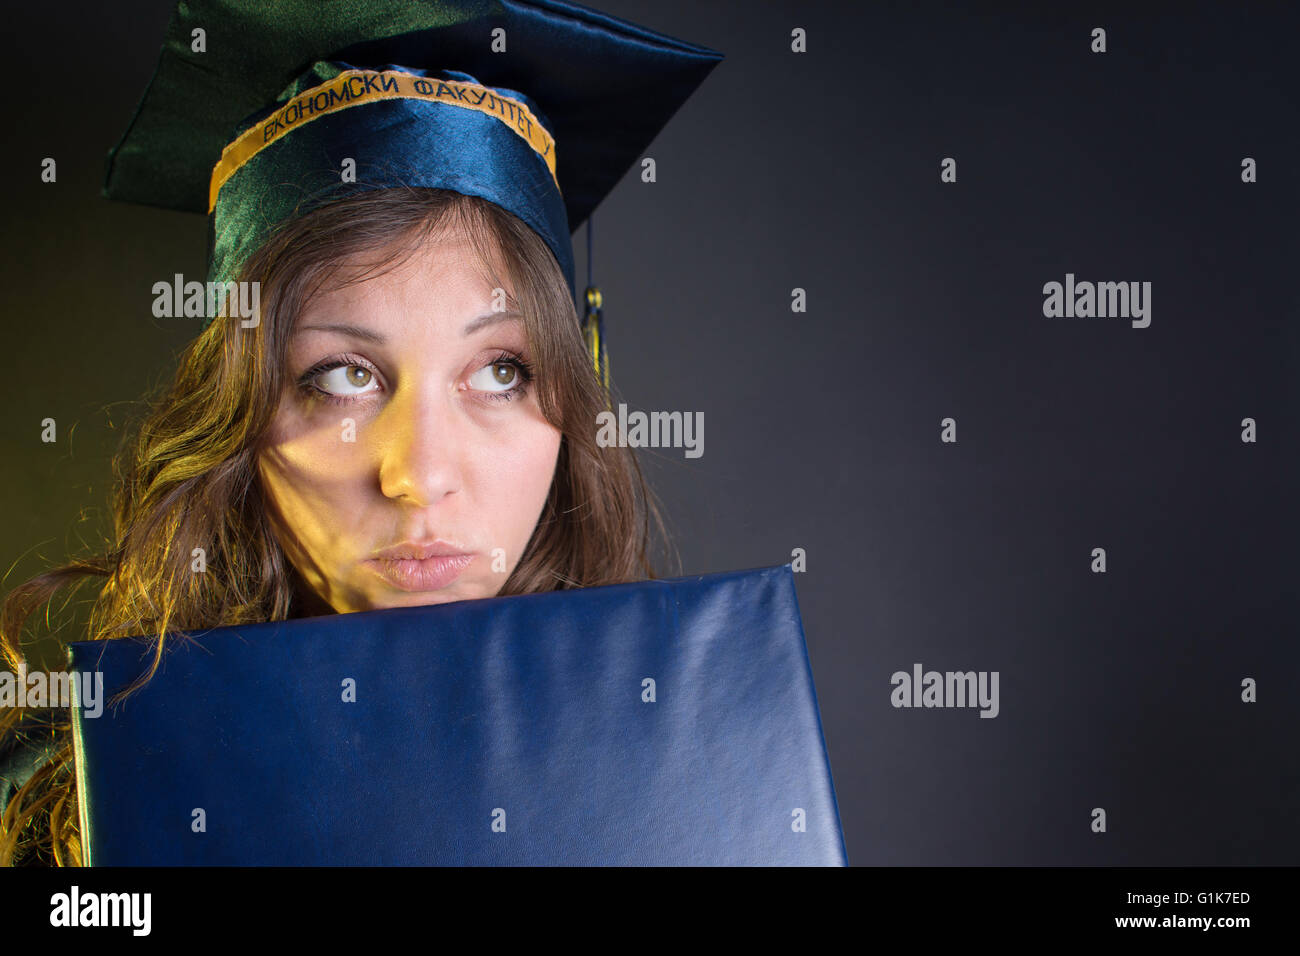 Brunette girl with a diploma in graduation costume and hat Stock Photo